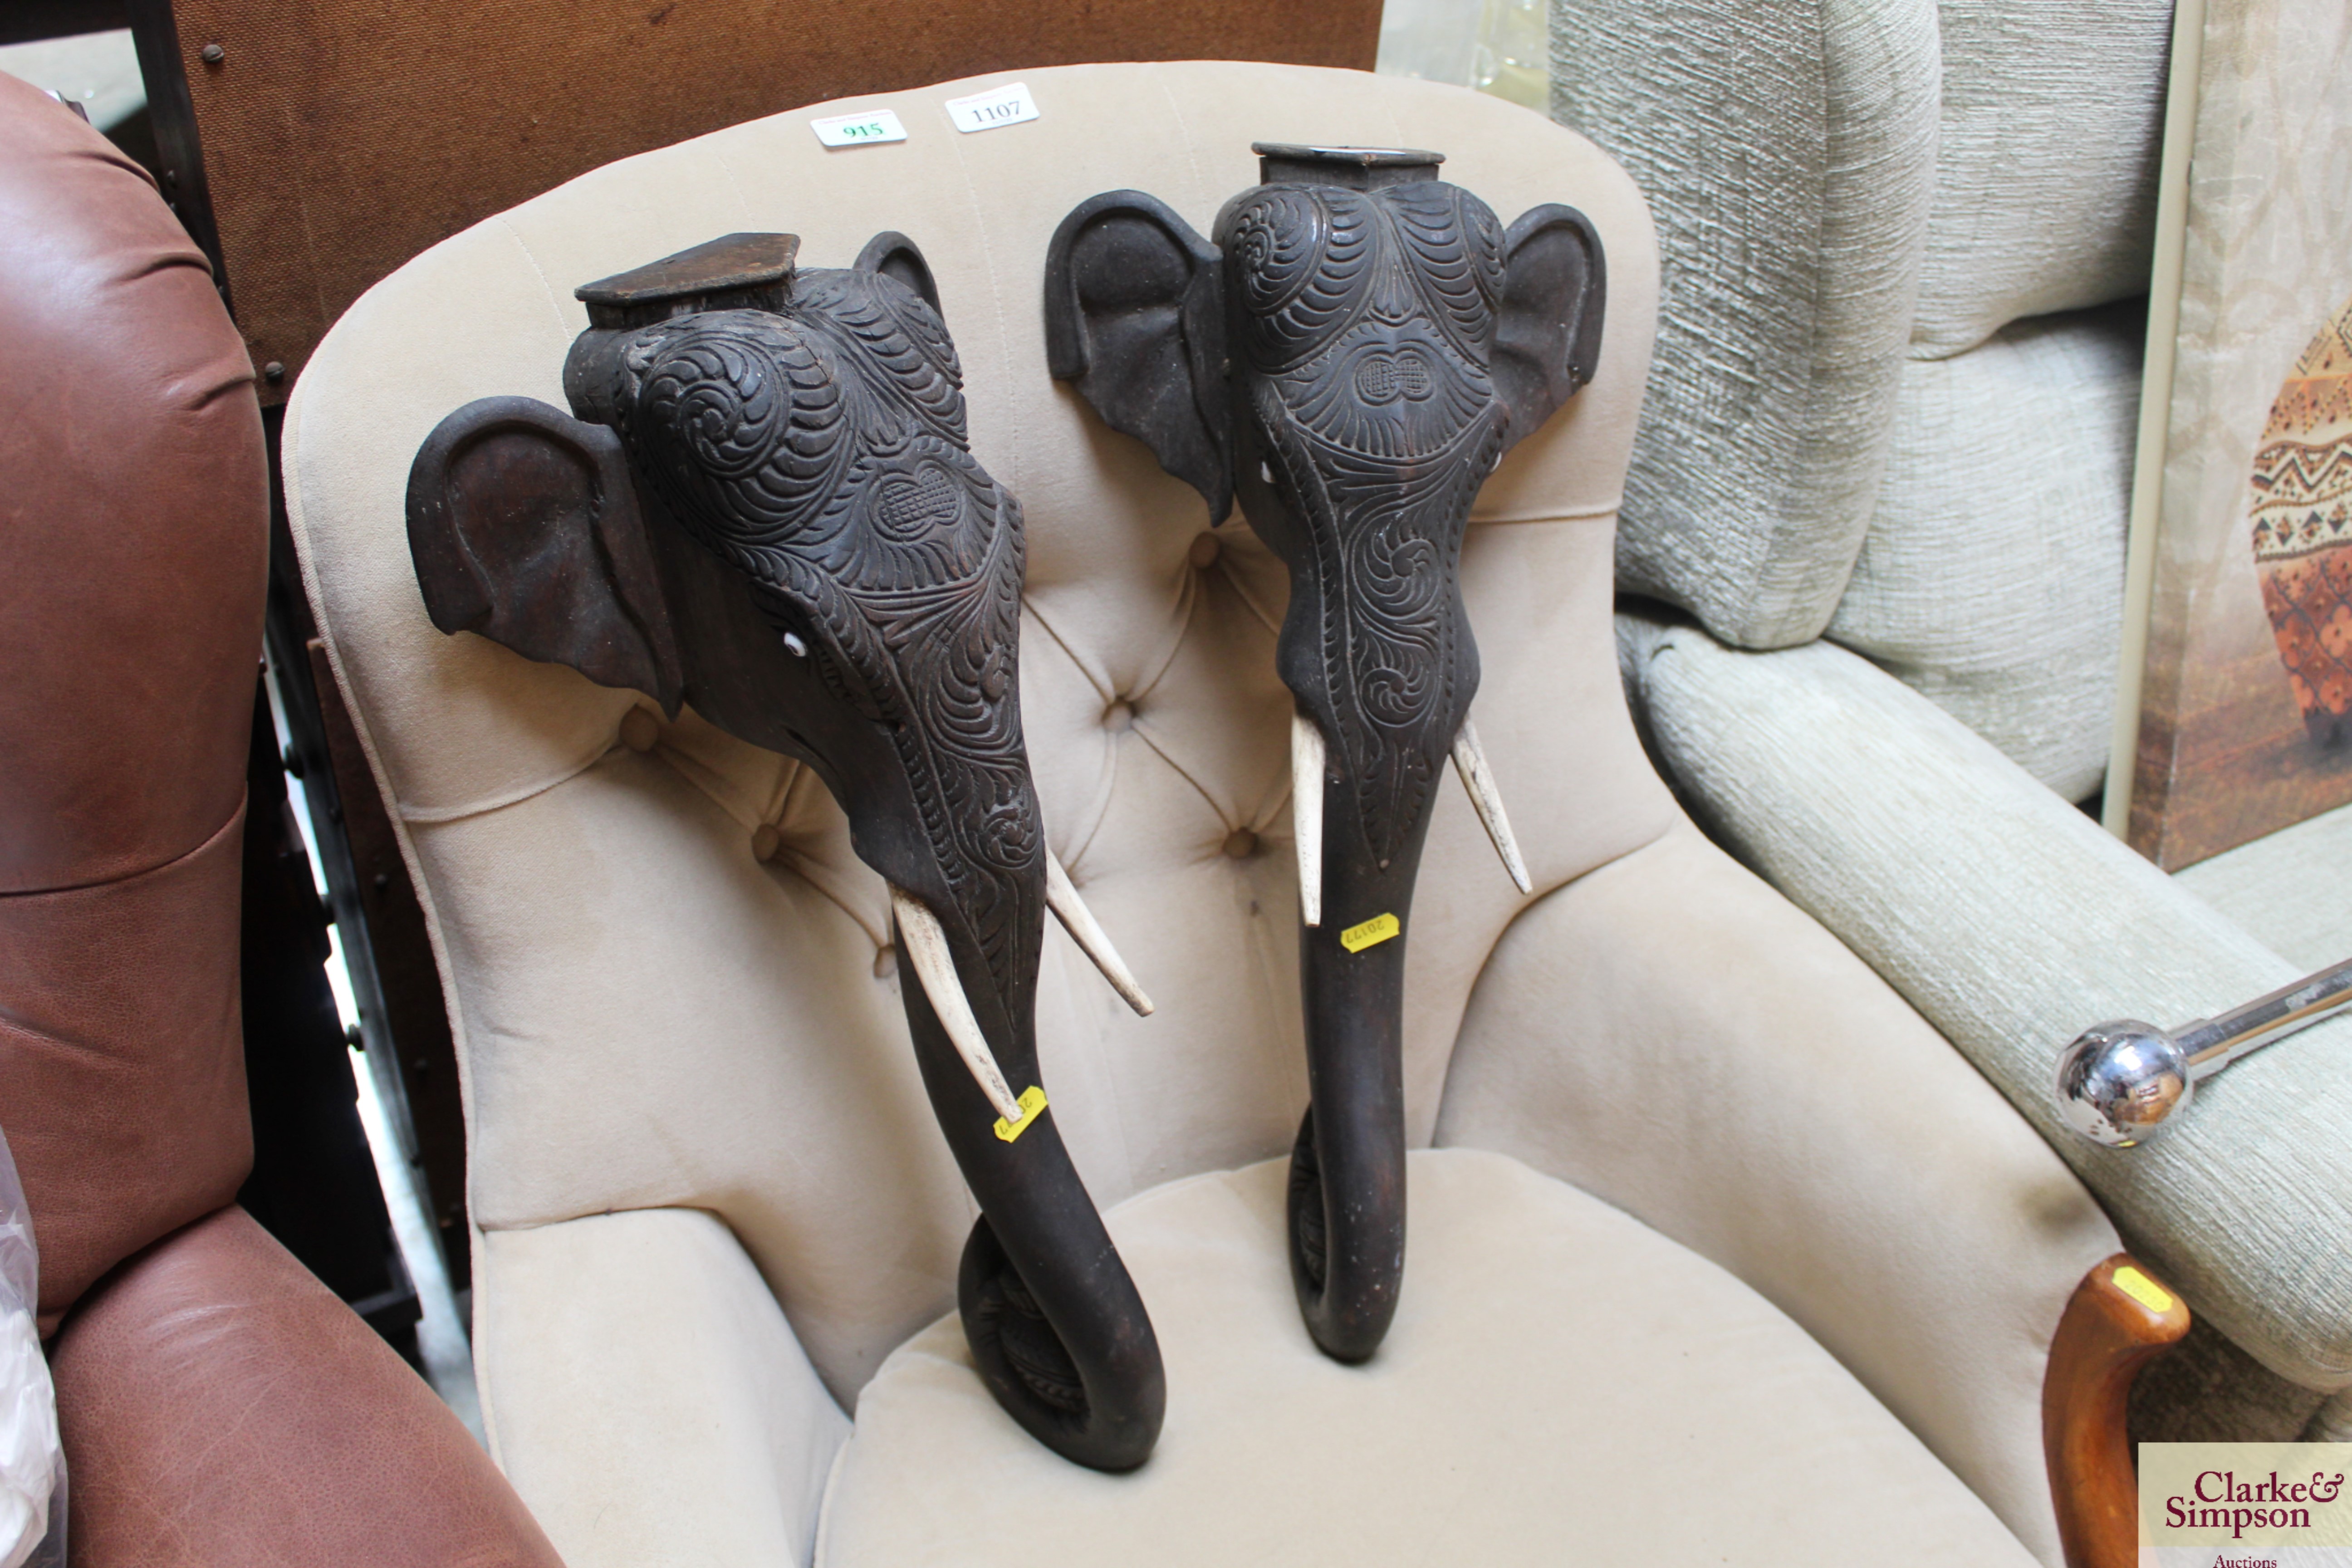 Two carved wooden elephant heads